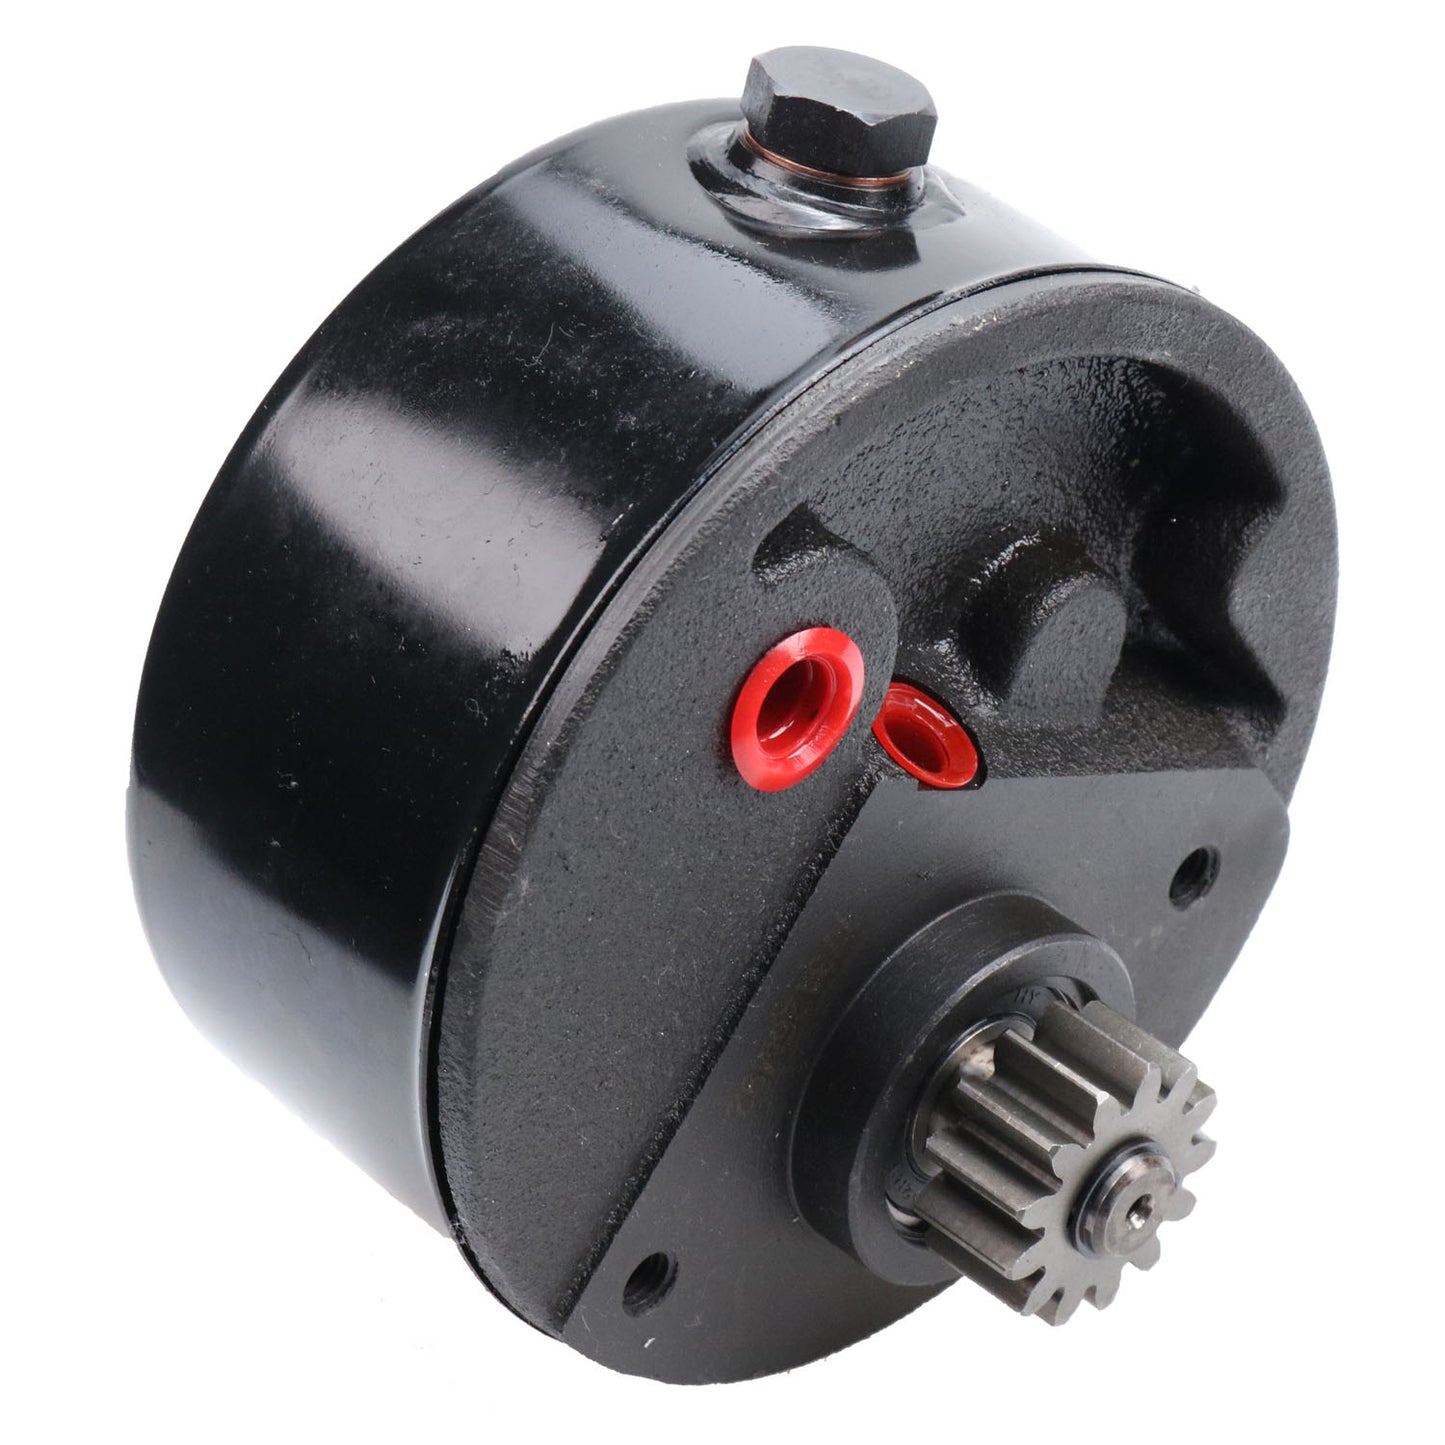 New 773126M92 Power Steering Pump Compatible with Massey Ferguson 230 235 245 250 20 20C 35 50 135 150